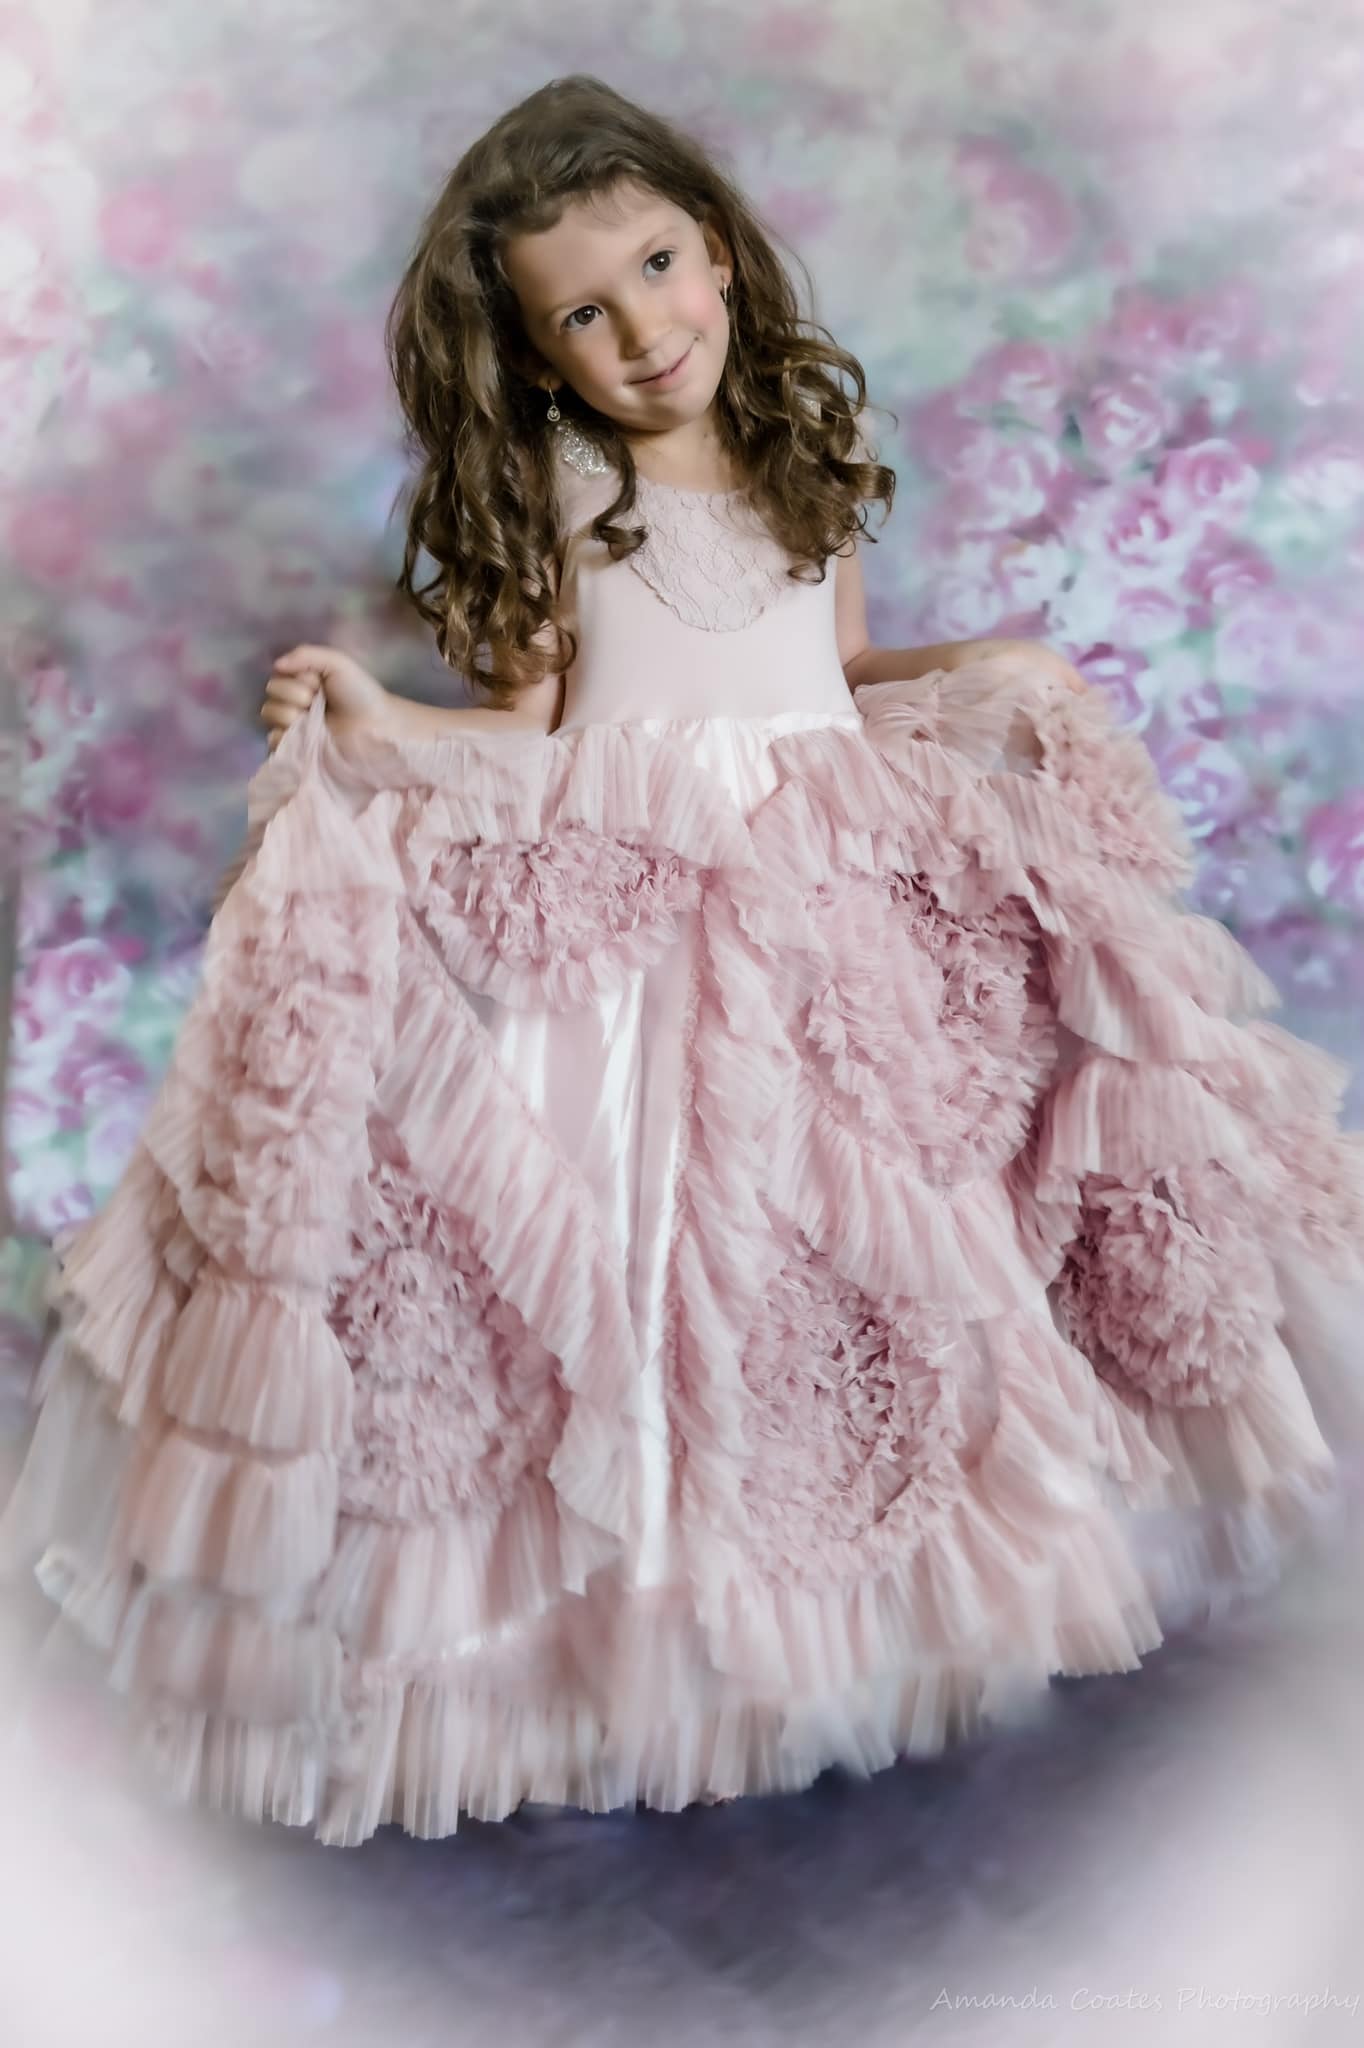 Kate Pink Flowers for Portrait Photography Backdrops